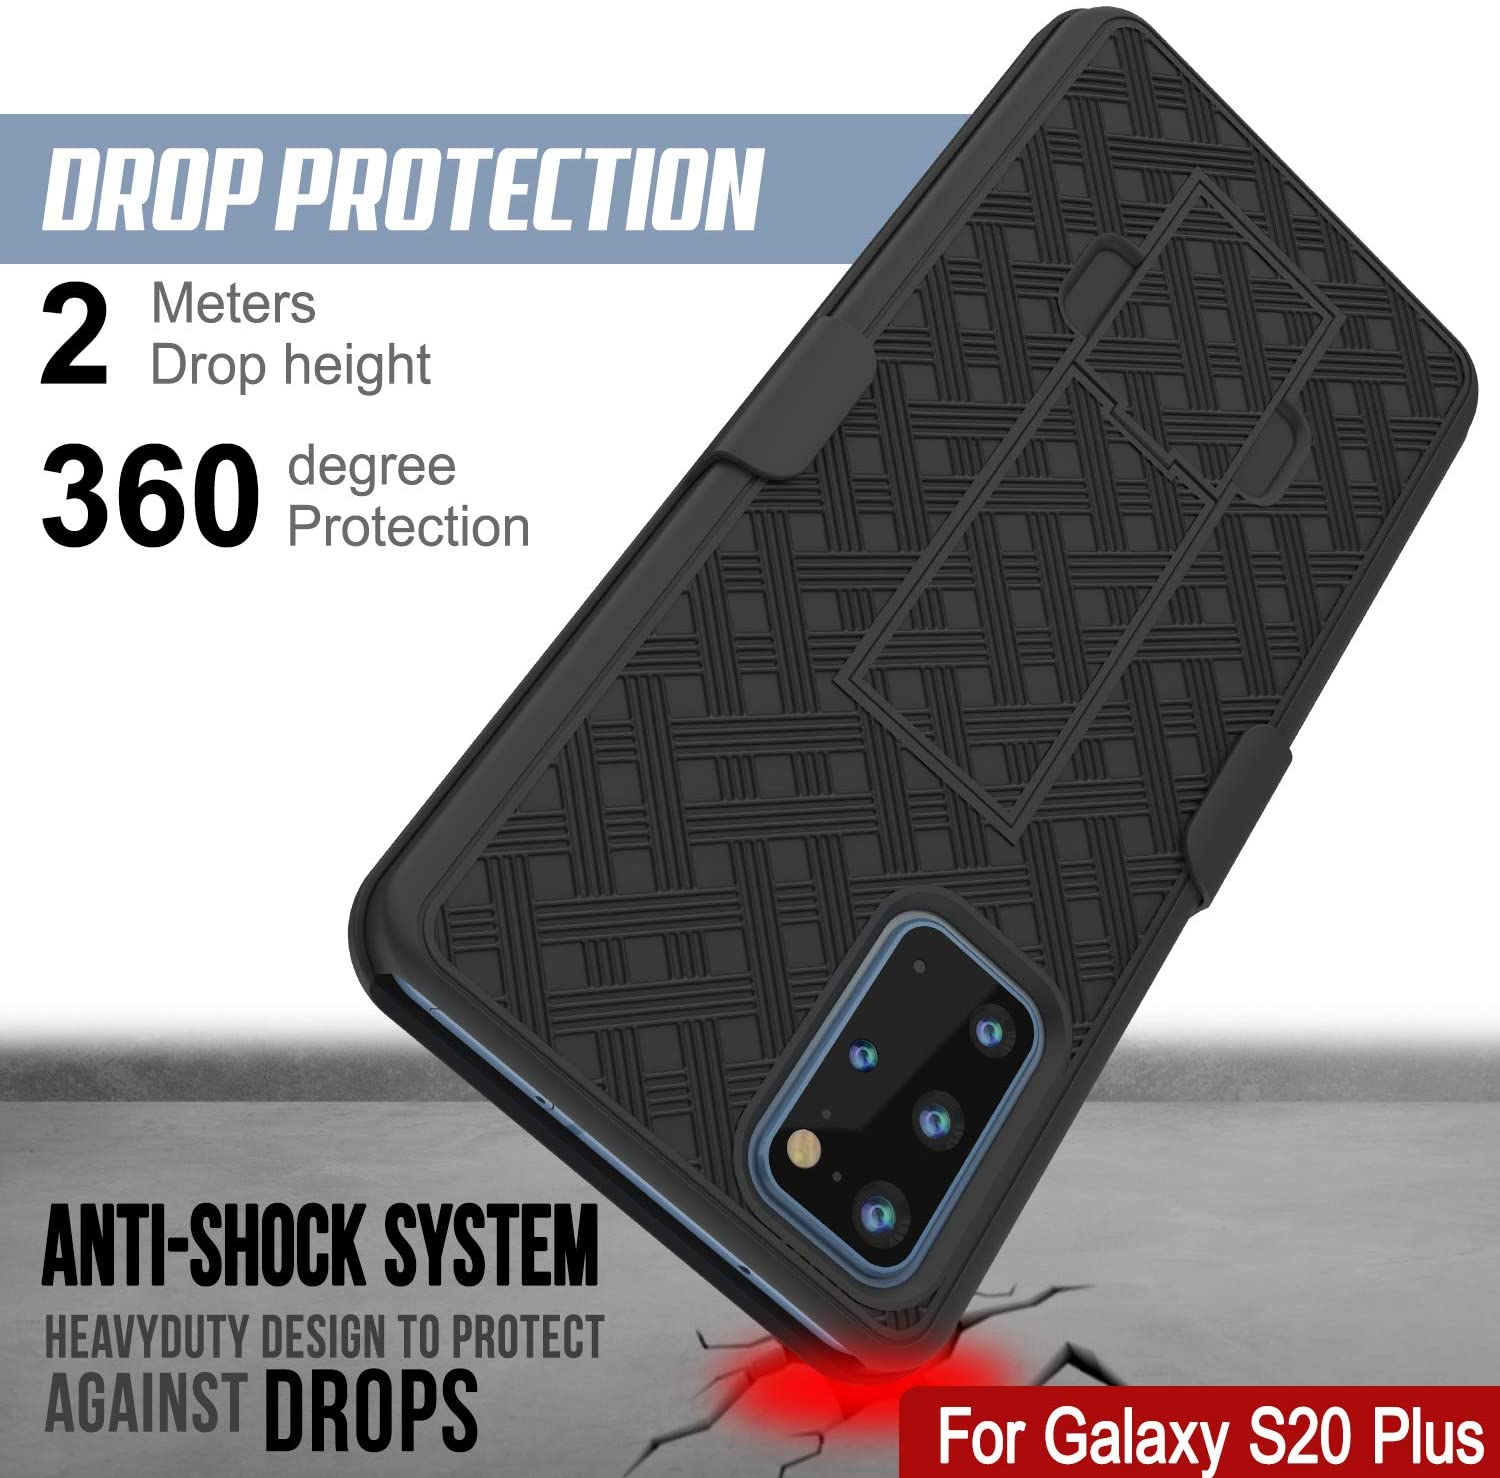 Galaxy S24 Plus Case, Punkcase Holster Belt Clip With Screen Protector [Light Blue]